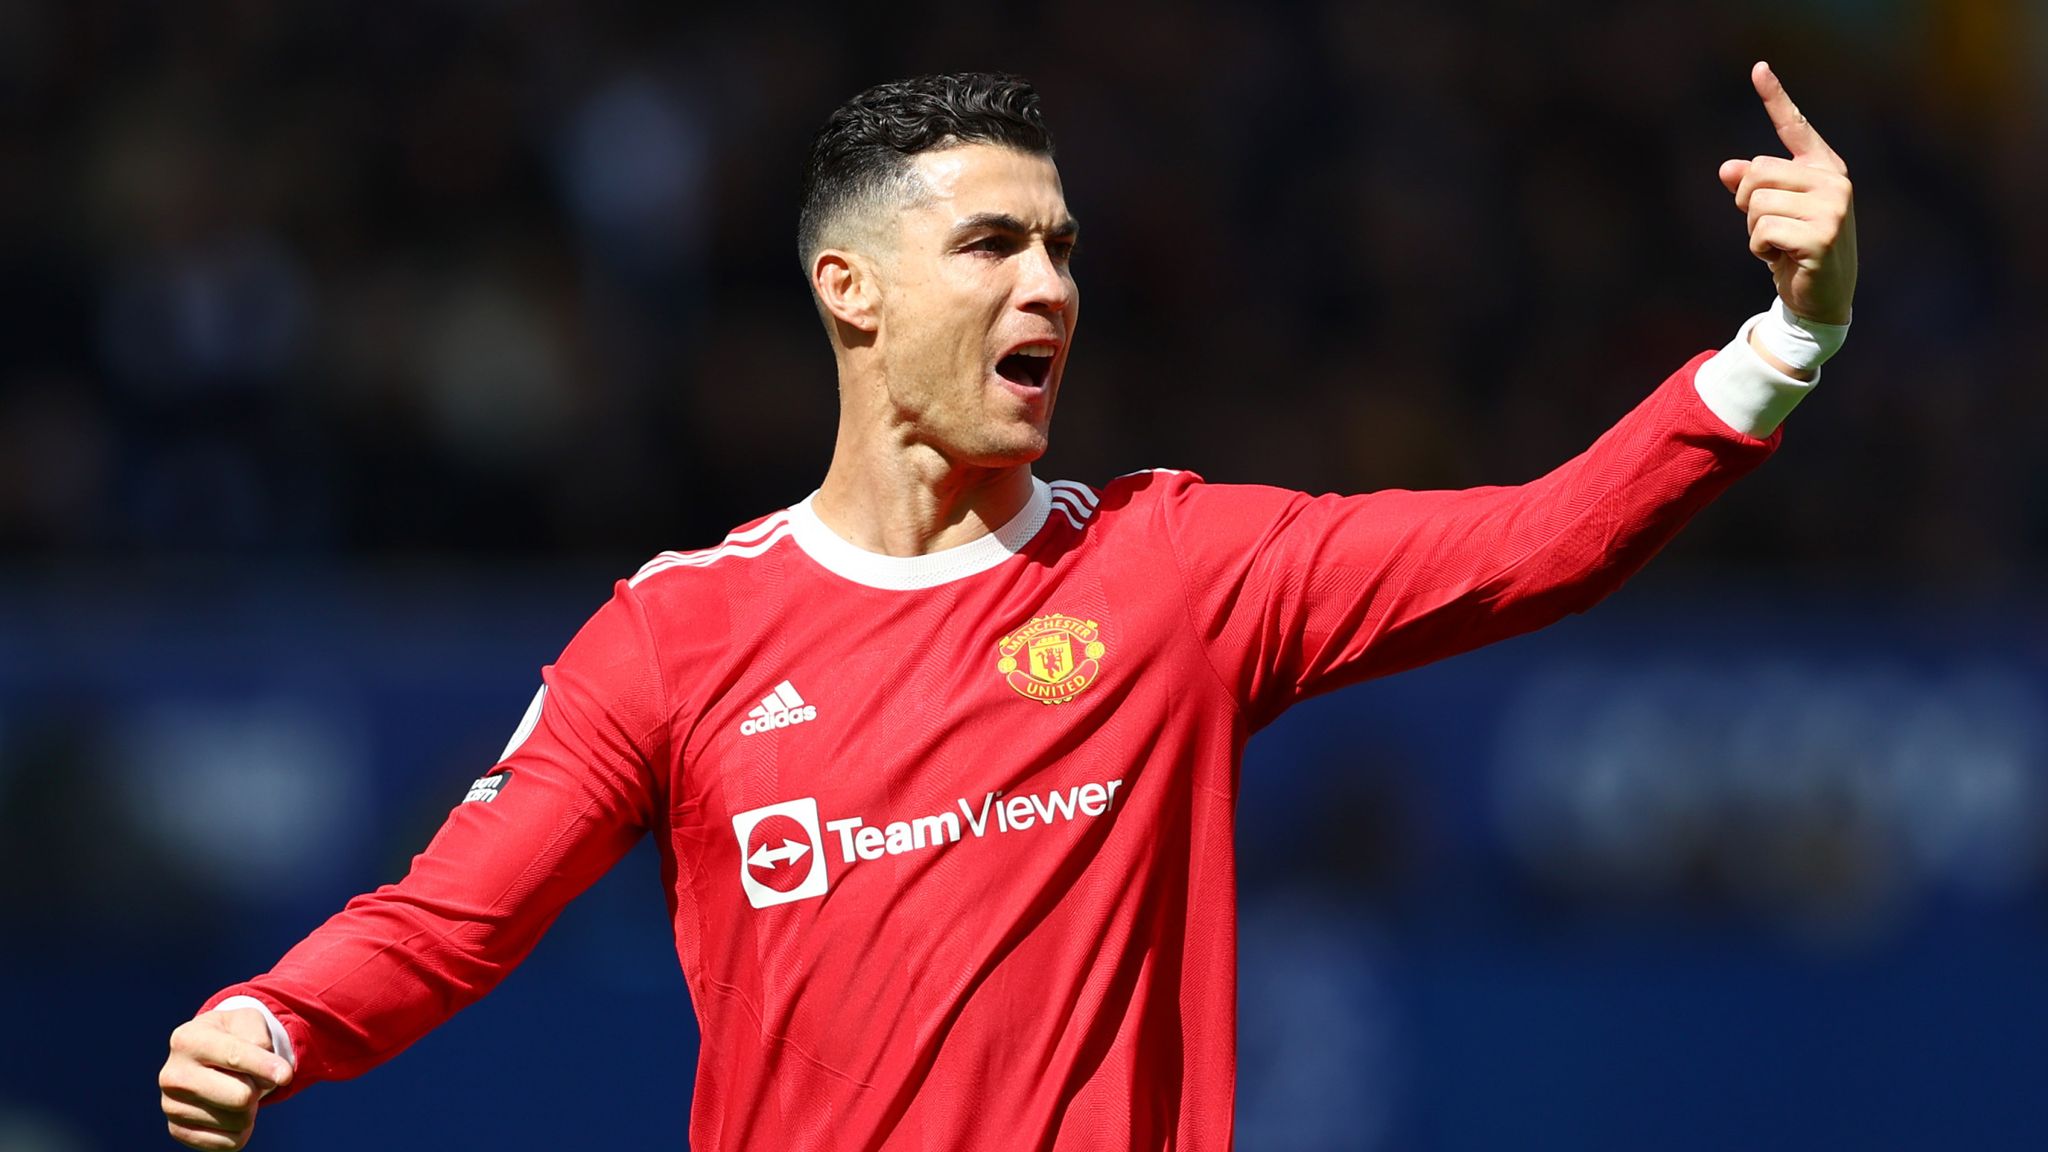 Man Utd's Cristiano Ronaldo apologises for 'outburst' following phone  incident after defeat at Everton | Football News | Sky Sports